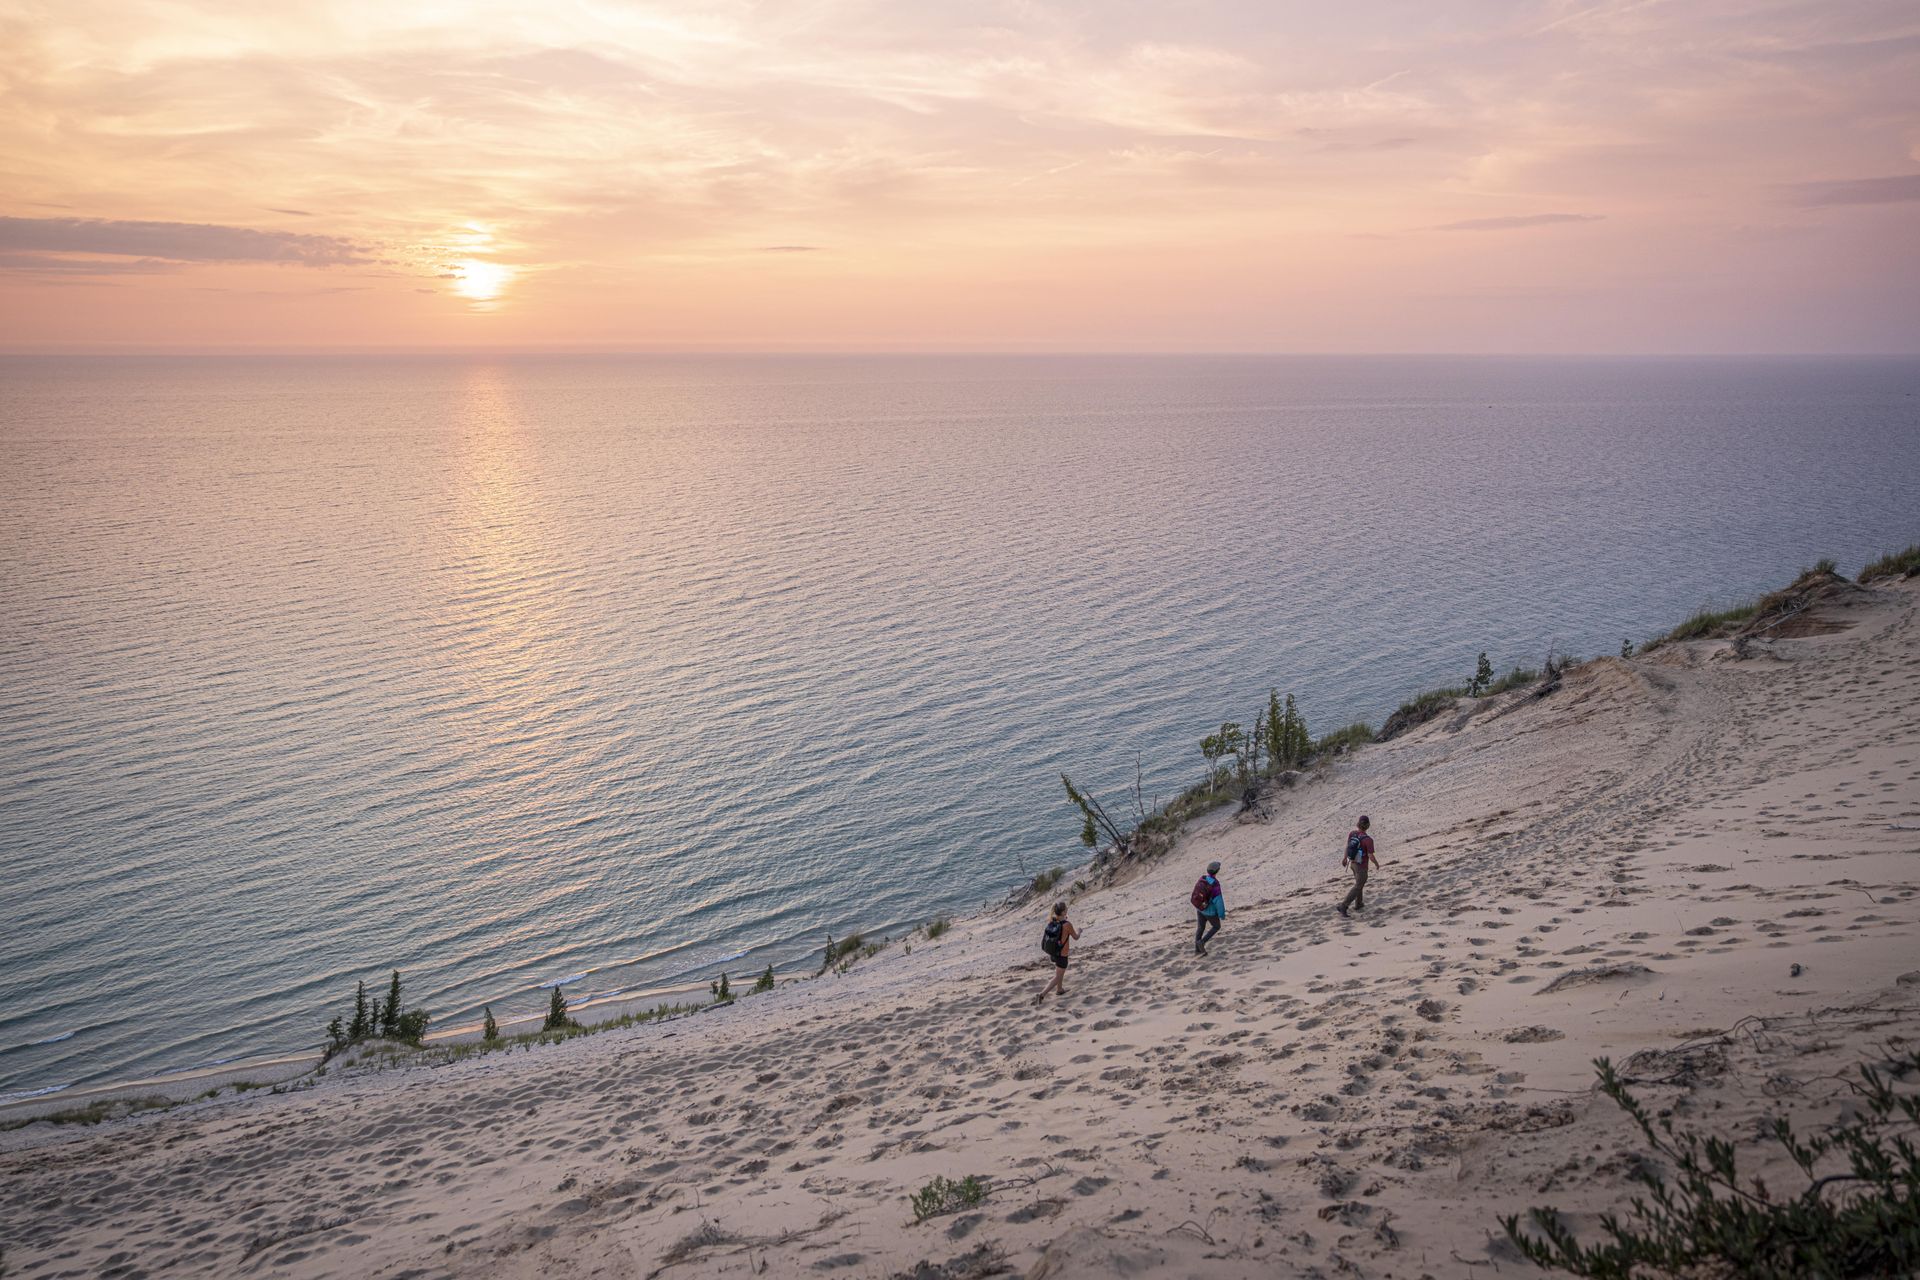 A group of people are walking up a sand dune overlooking the ocean at sunset.